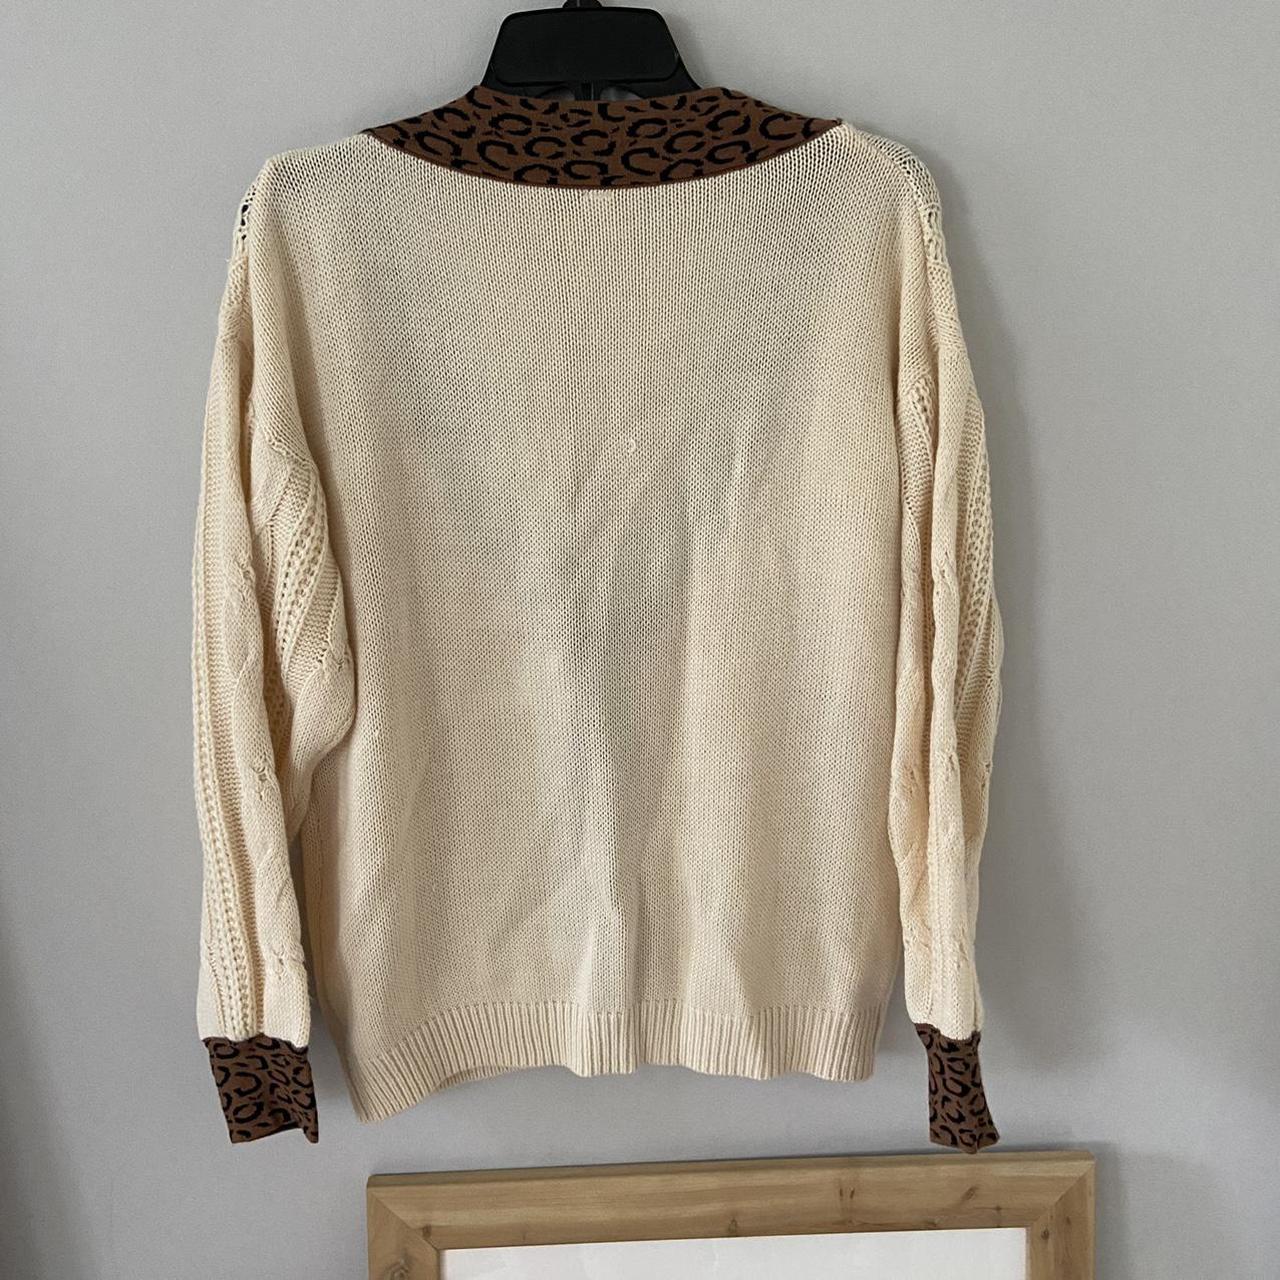 Product Image 3 - Cream cable knit cardigan with